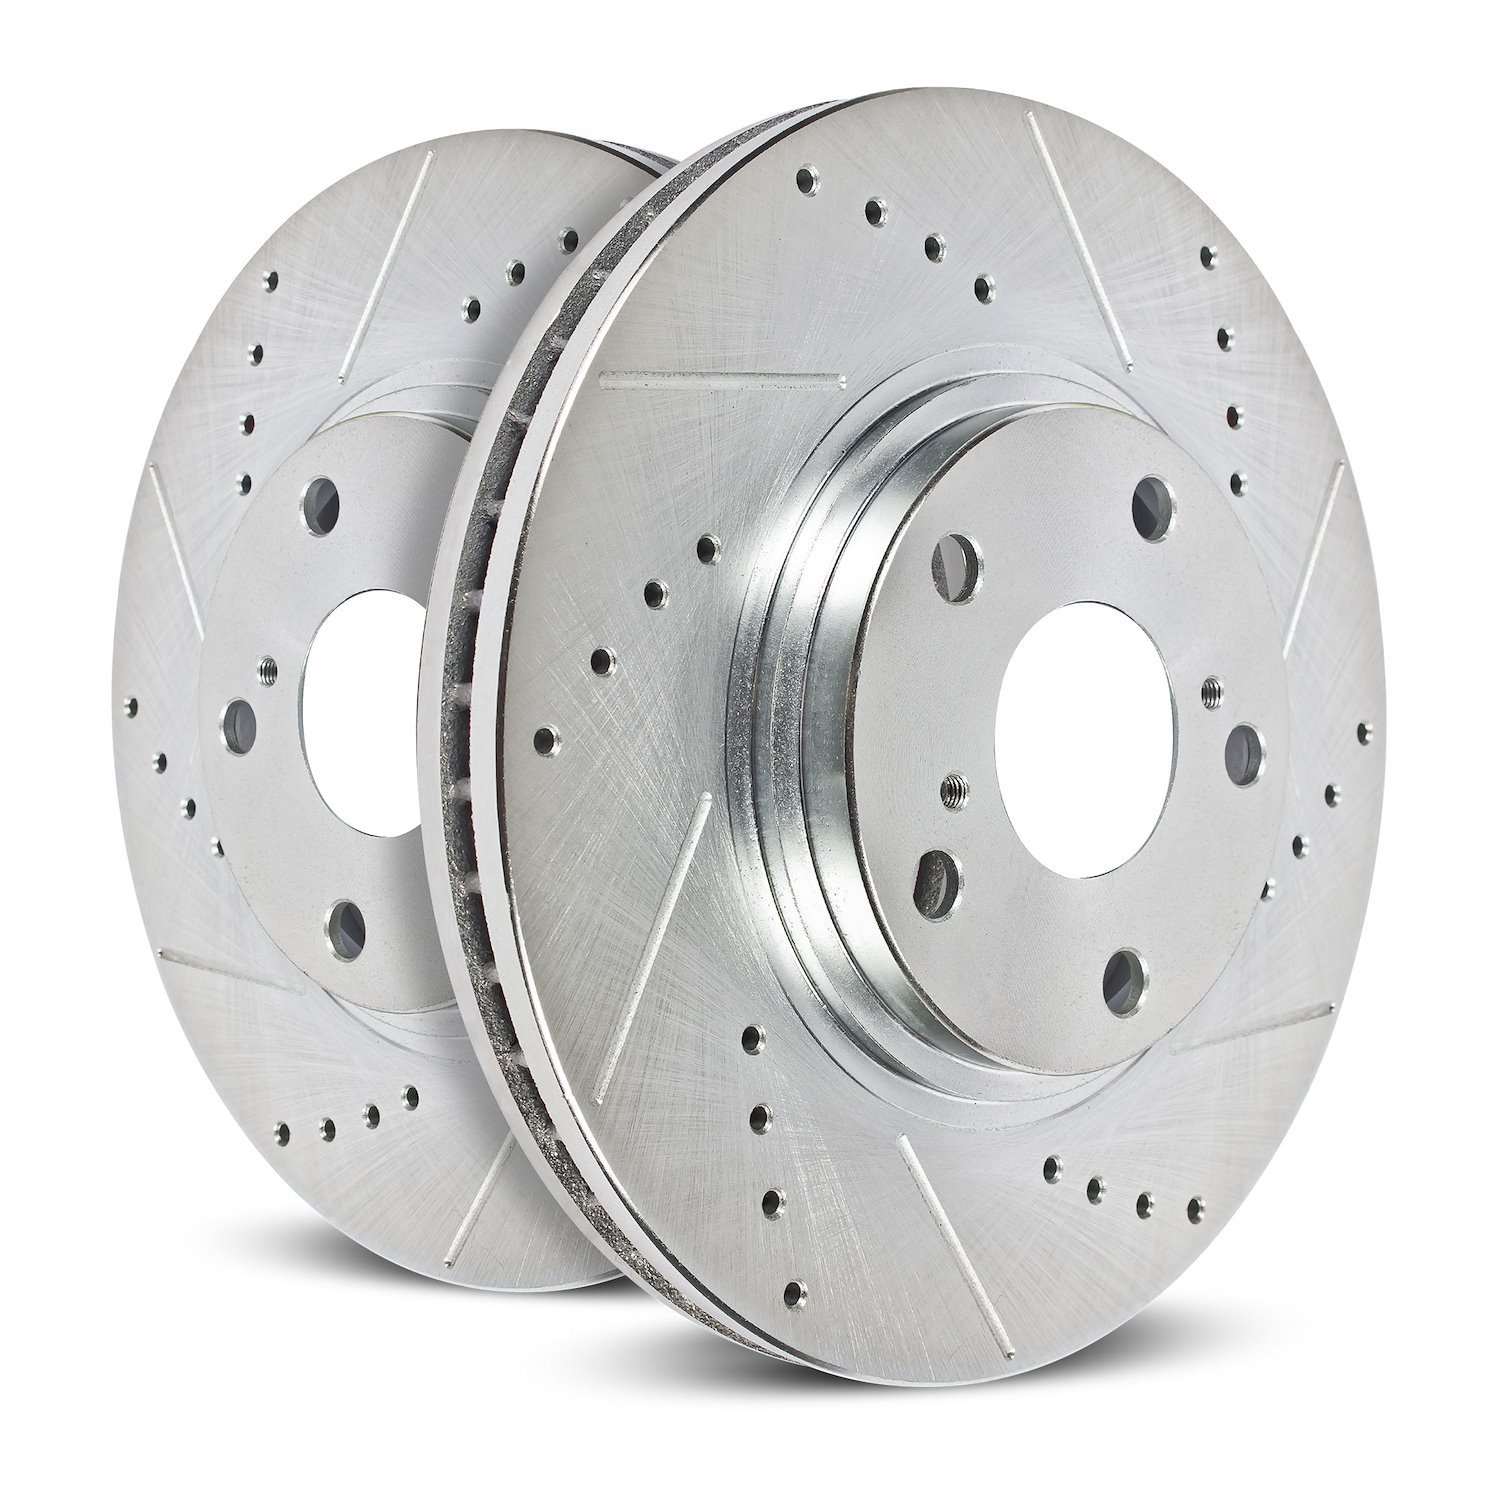 Power Stop drilled and slotted rotors give you